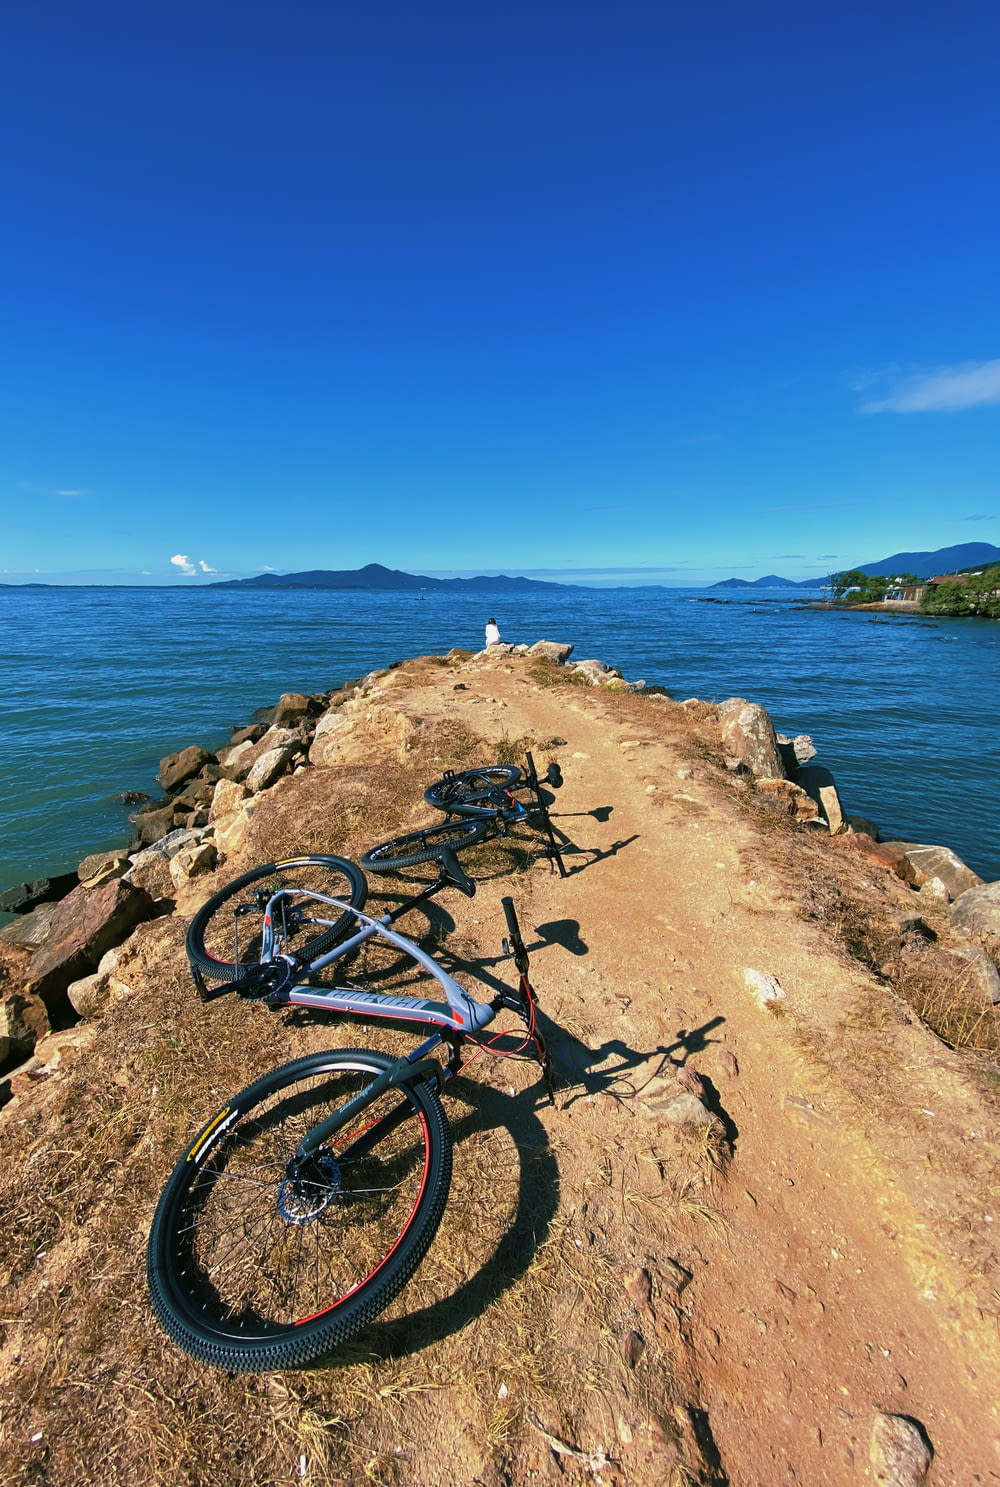 blue and black mountain bike on brown rock near body of water during daytime